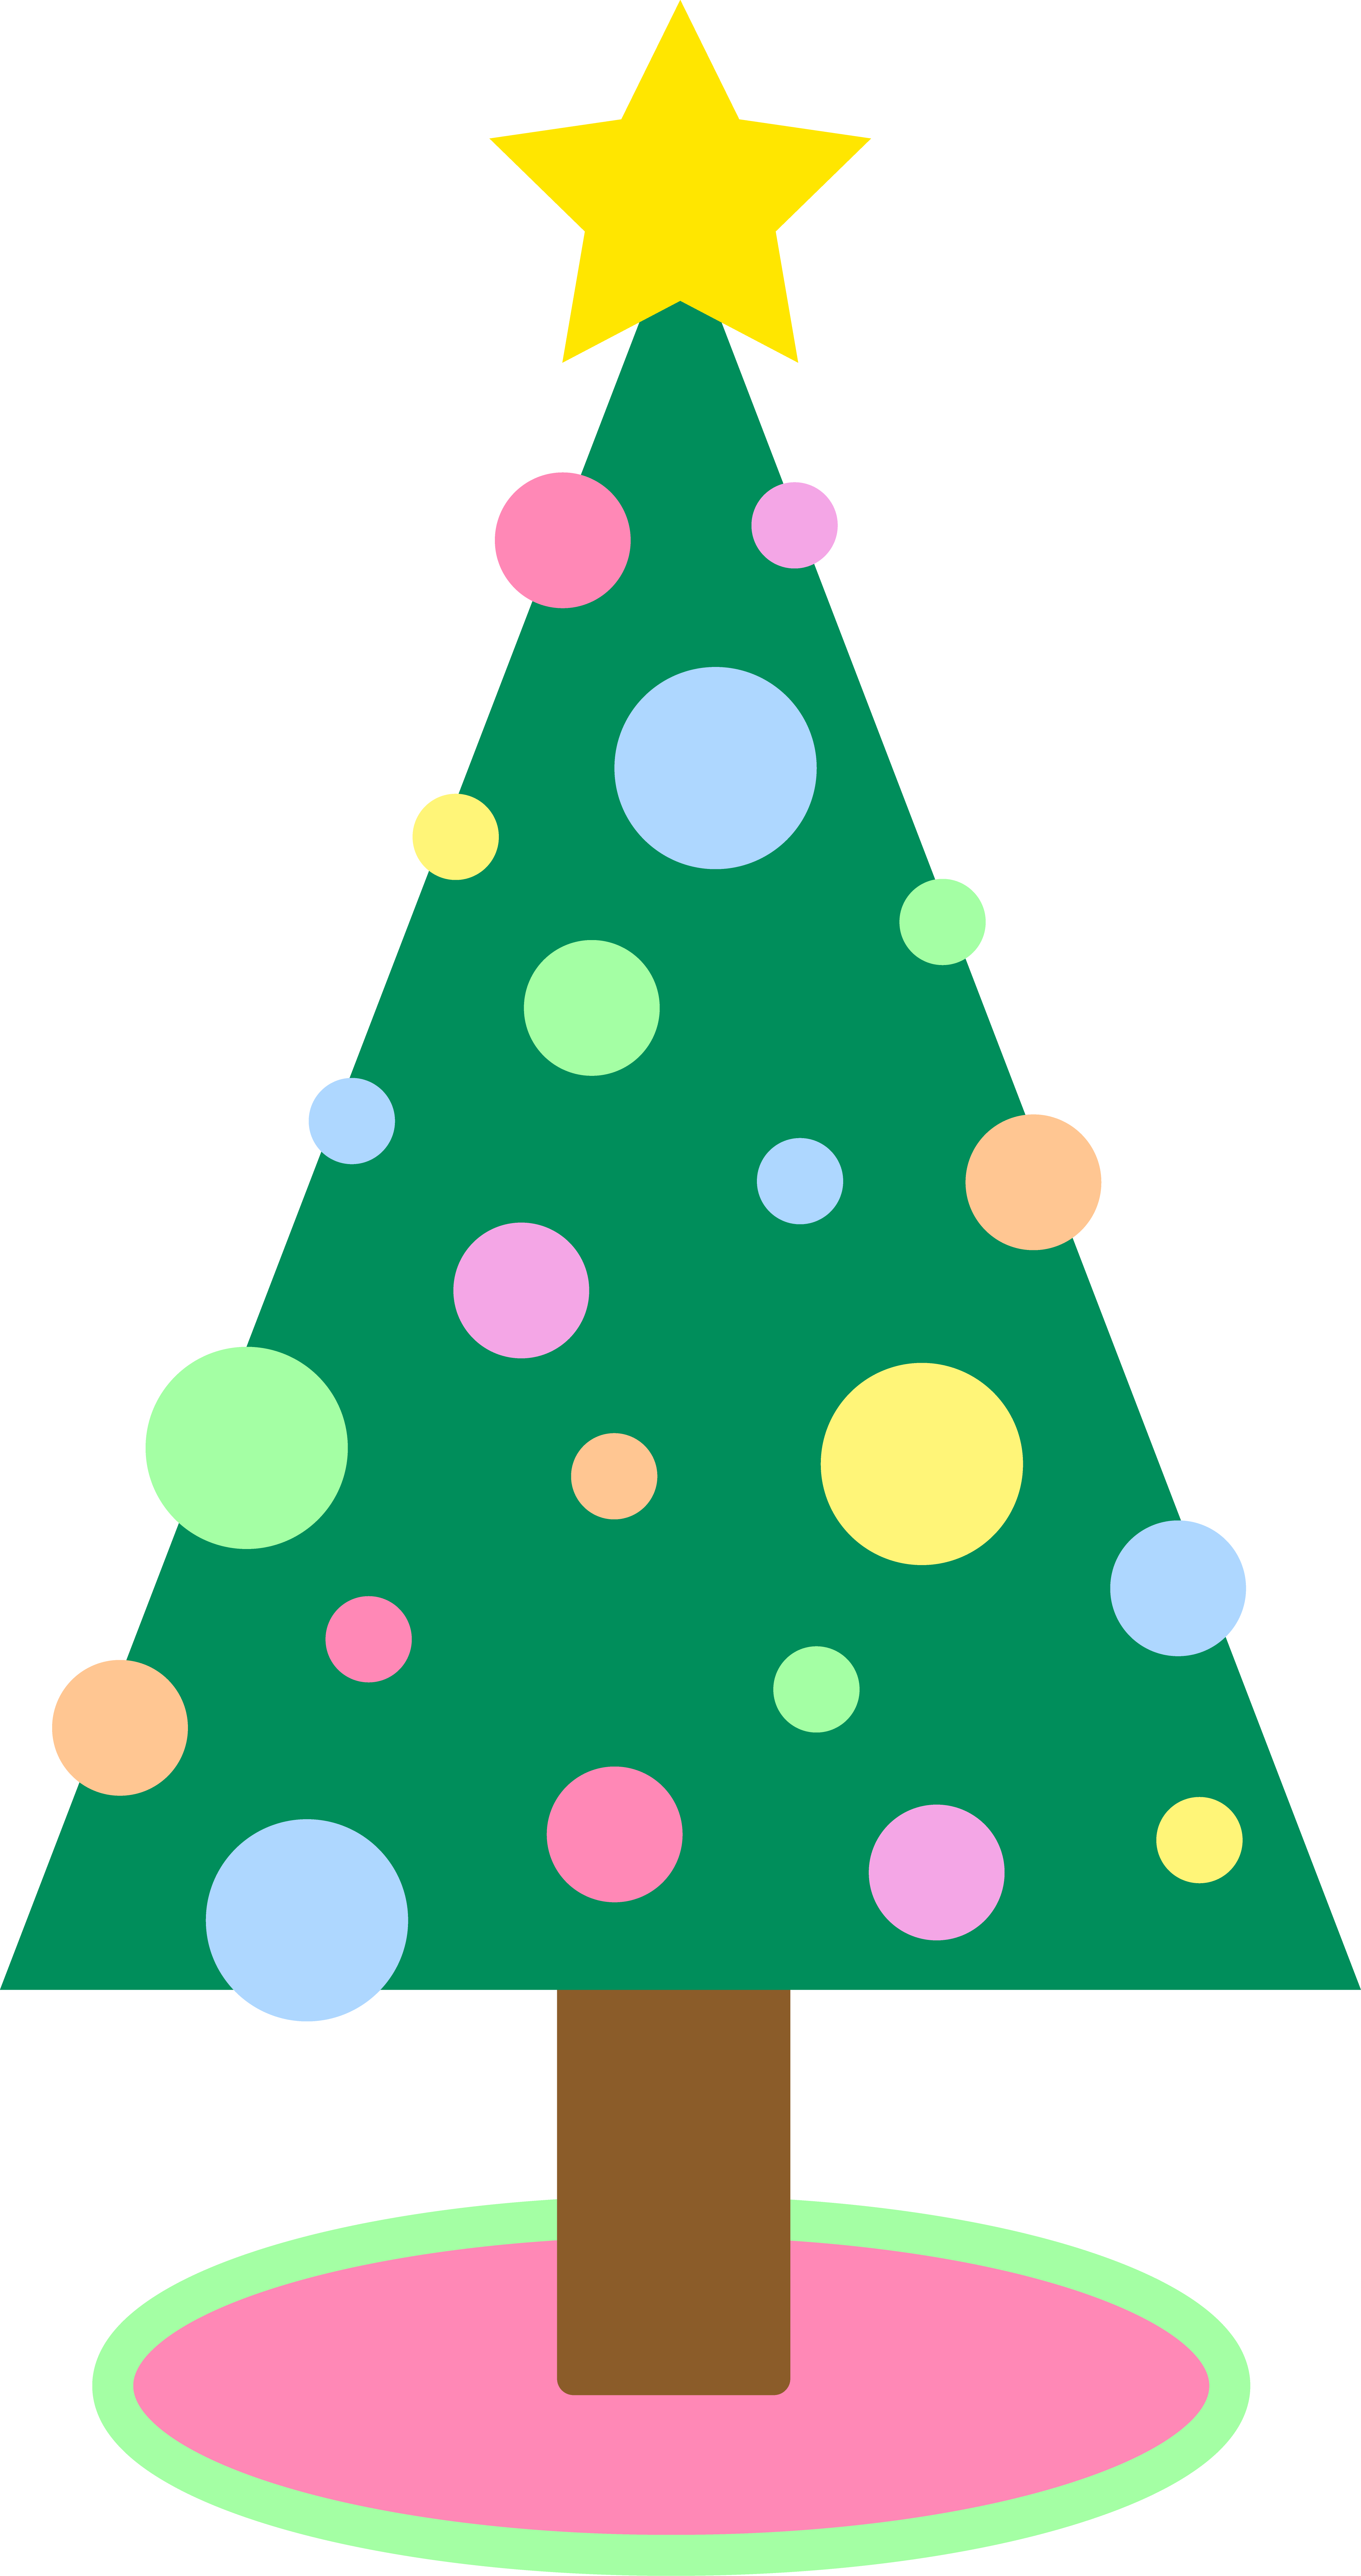 Cute simple pastellored christmas tree free clip art